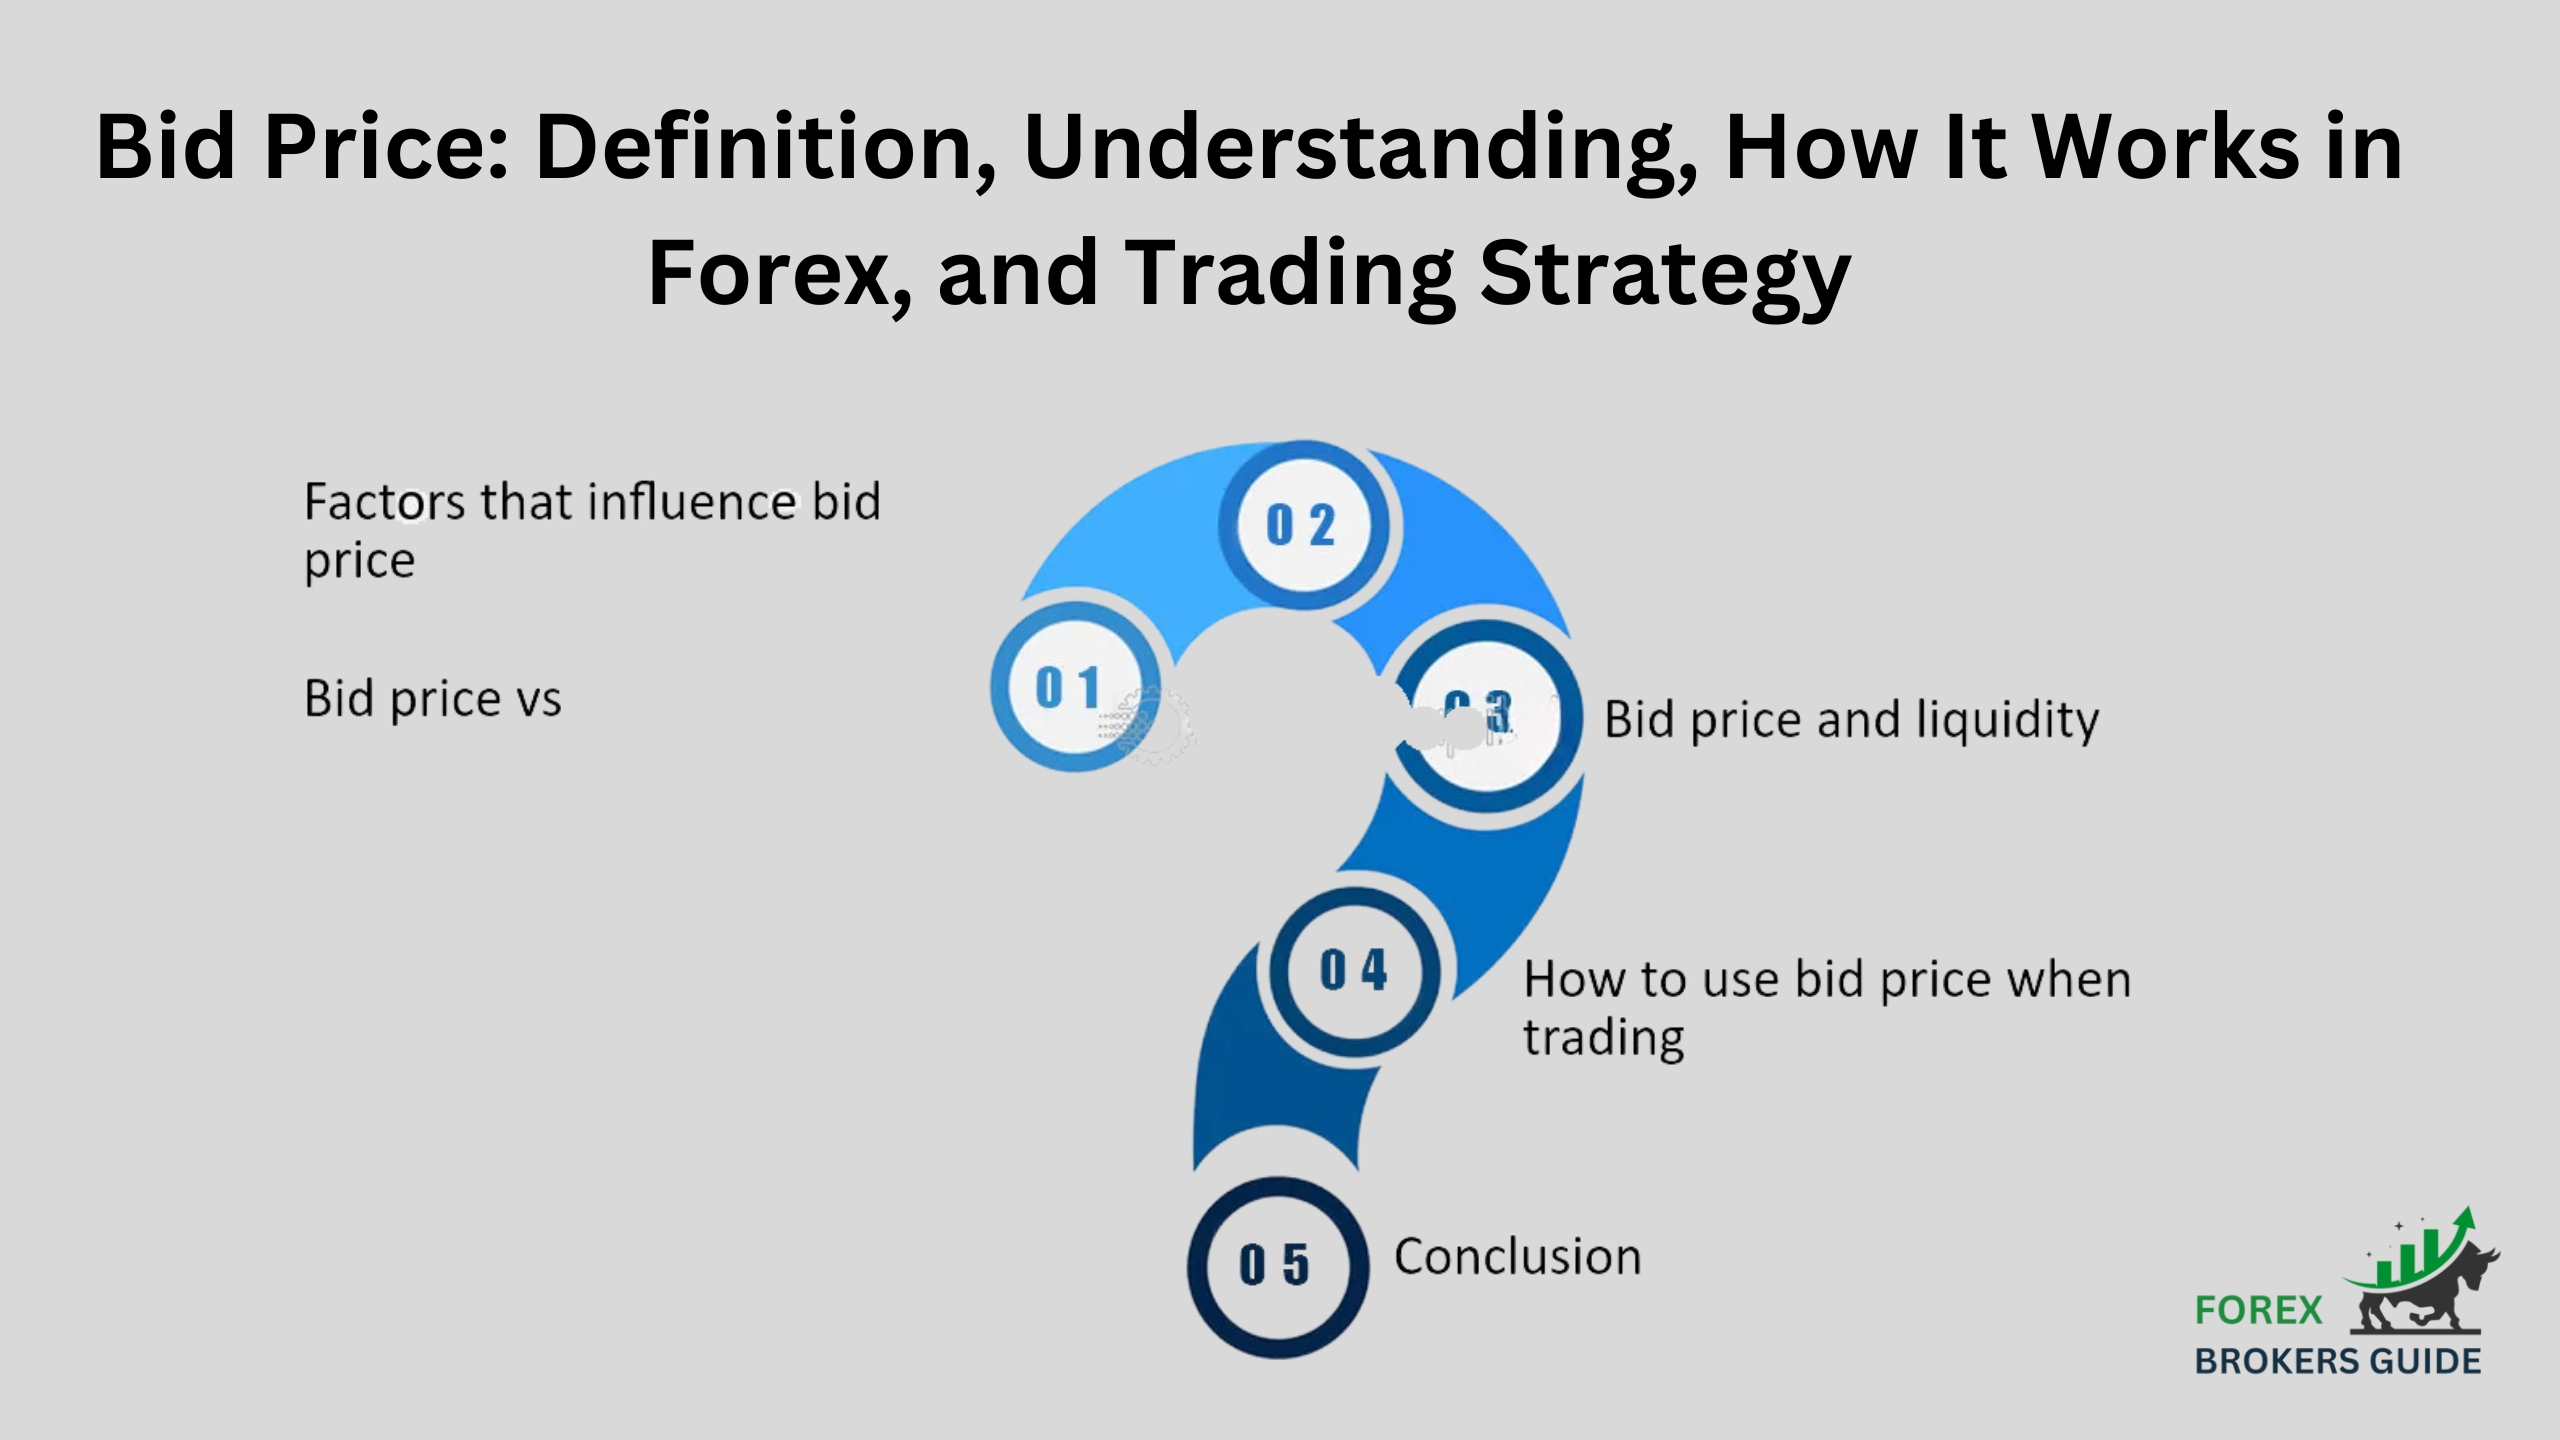 Bid Price: Definition, Understanding, How It Works in Forex, and Trading Strategy